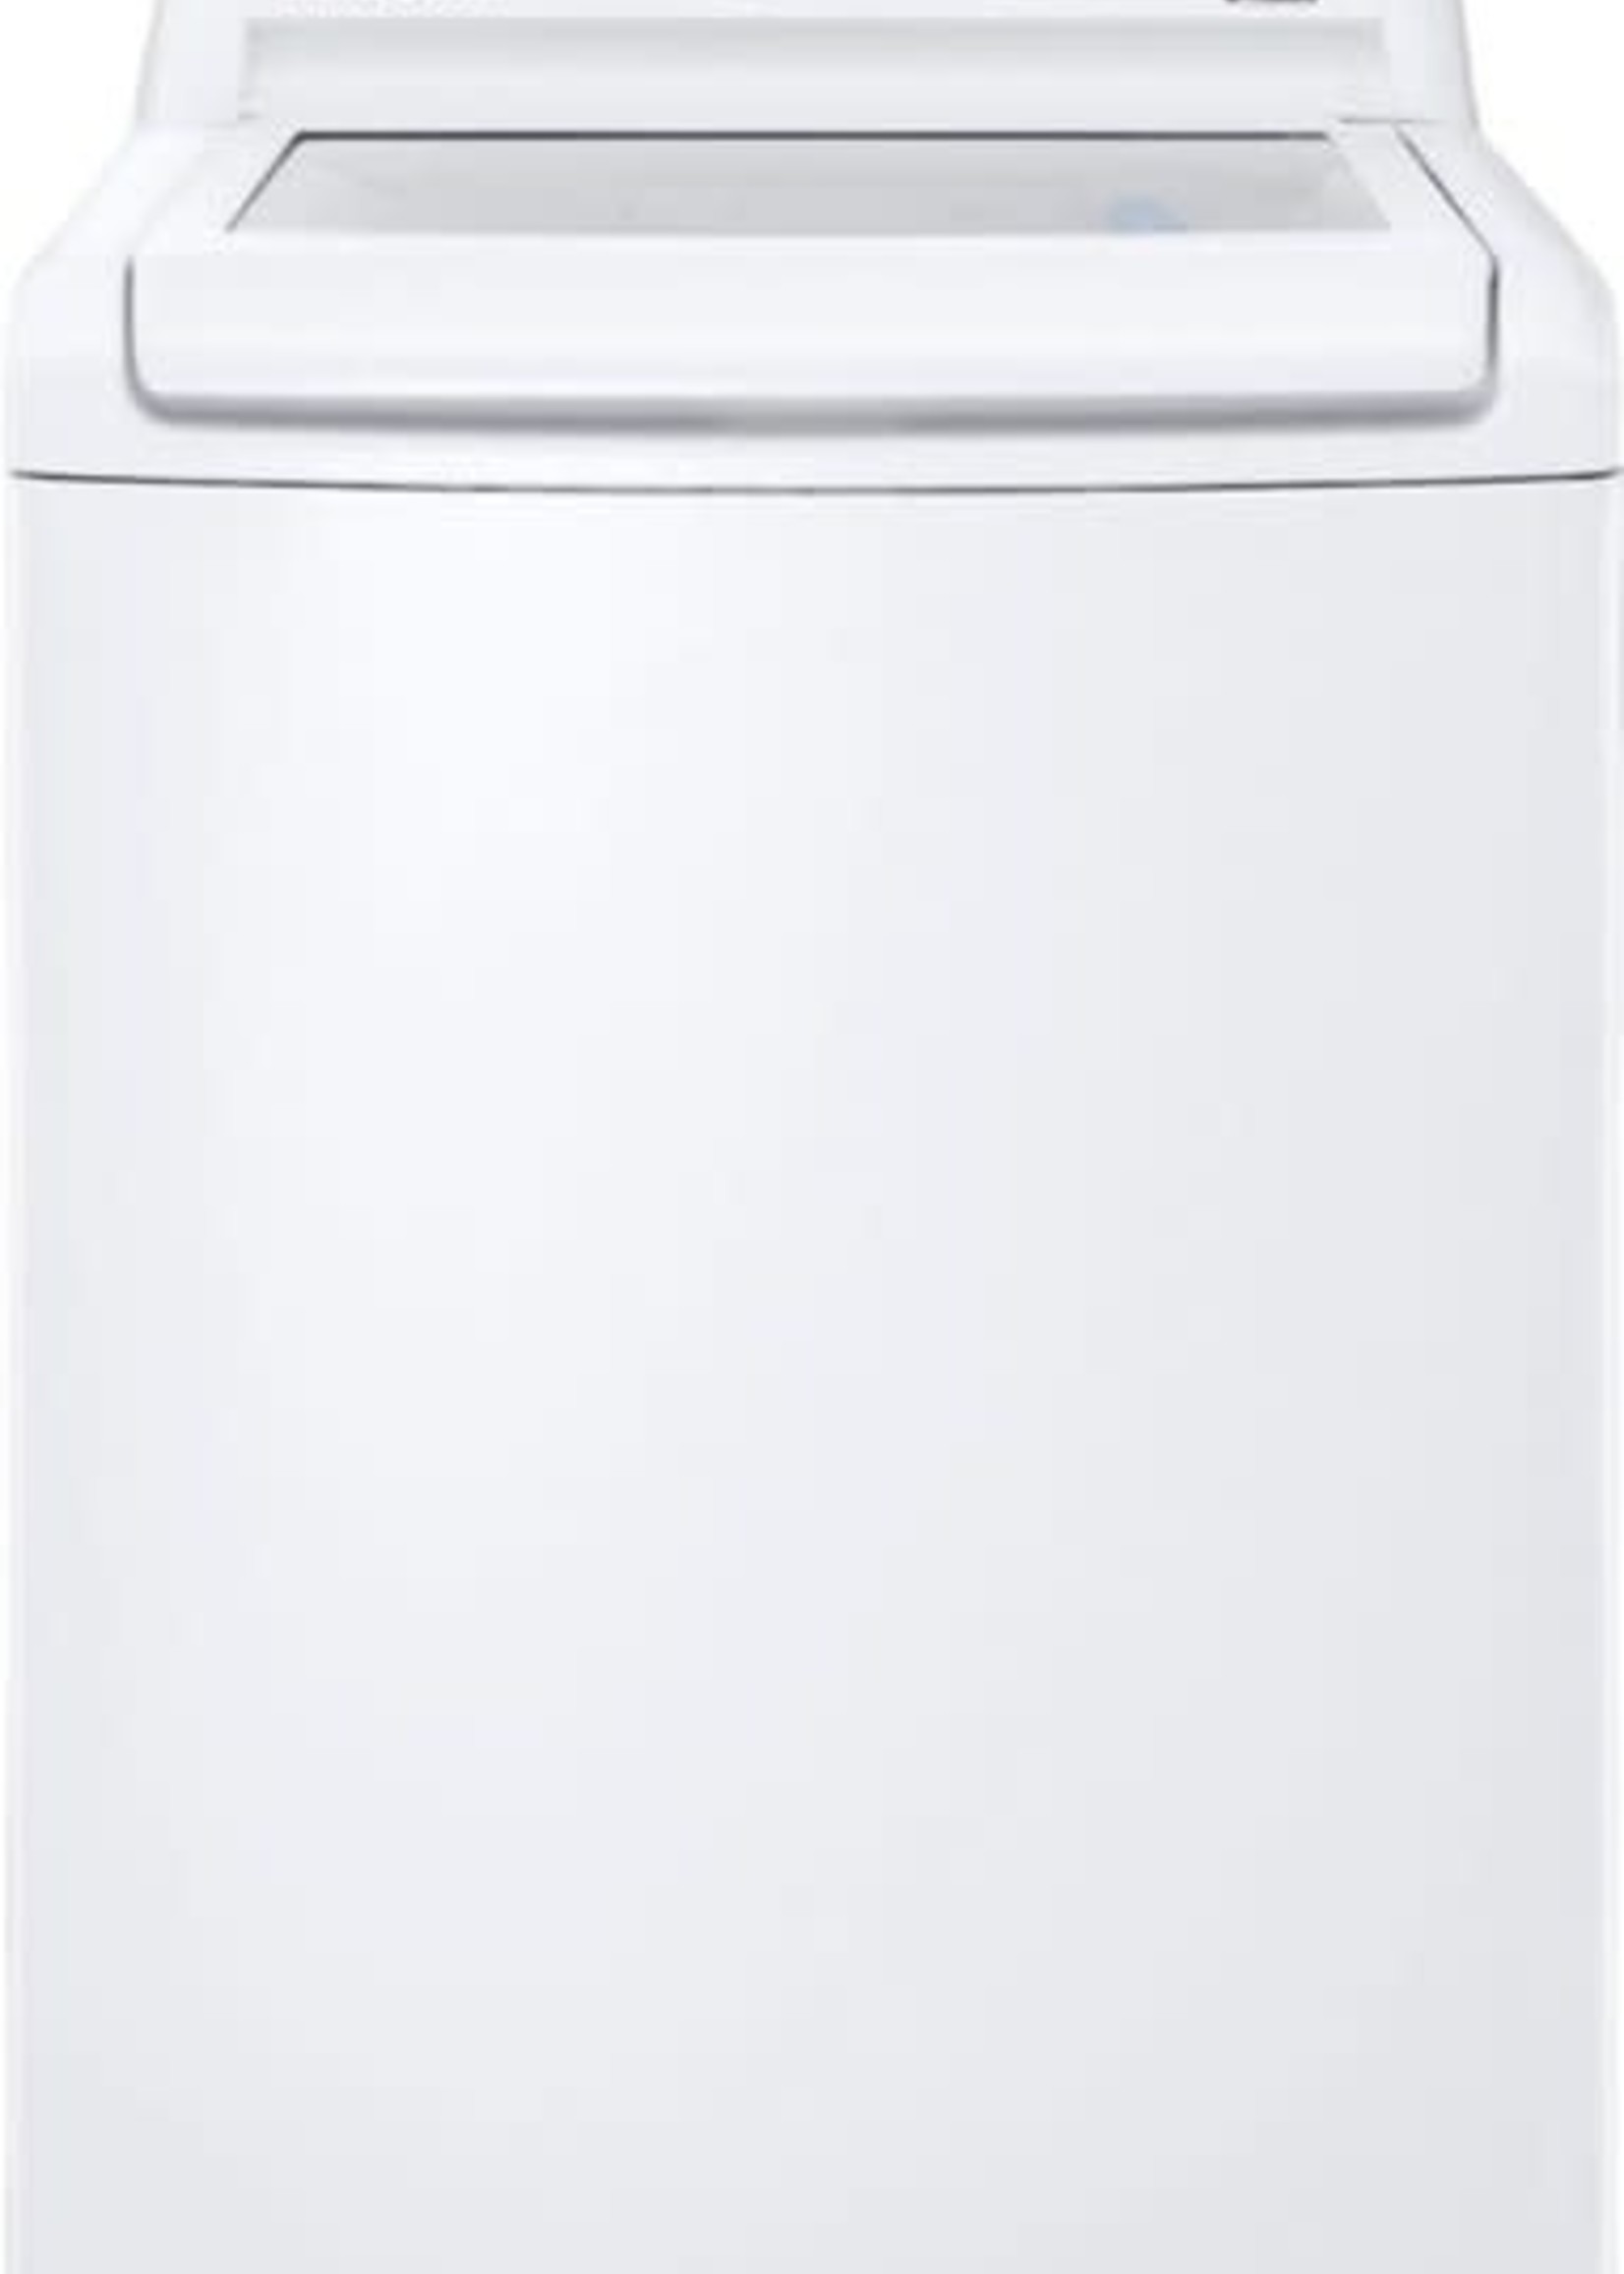 LG *LG  WT7100CW   4.5-cu ft High Efficiency Top-Load Washer (White